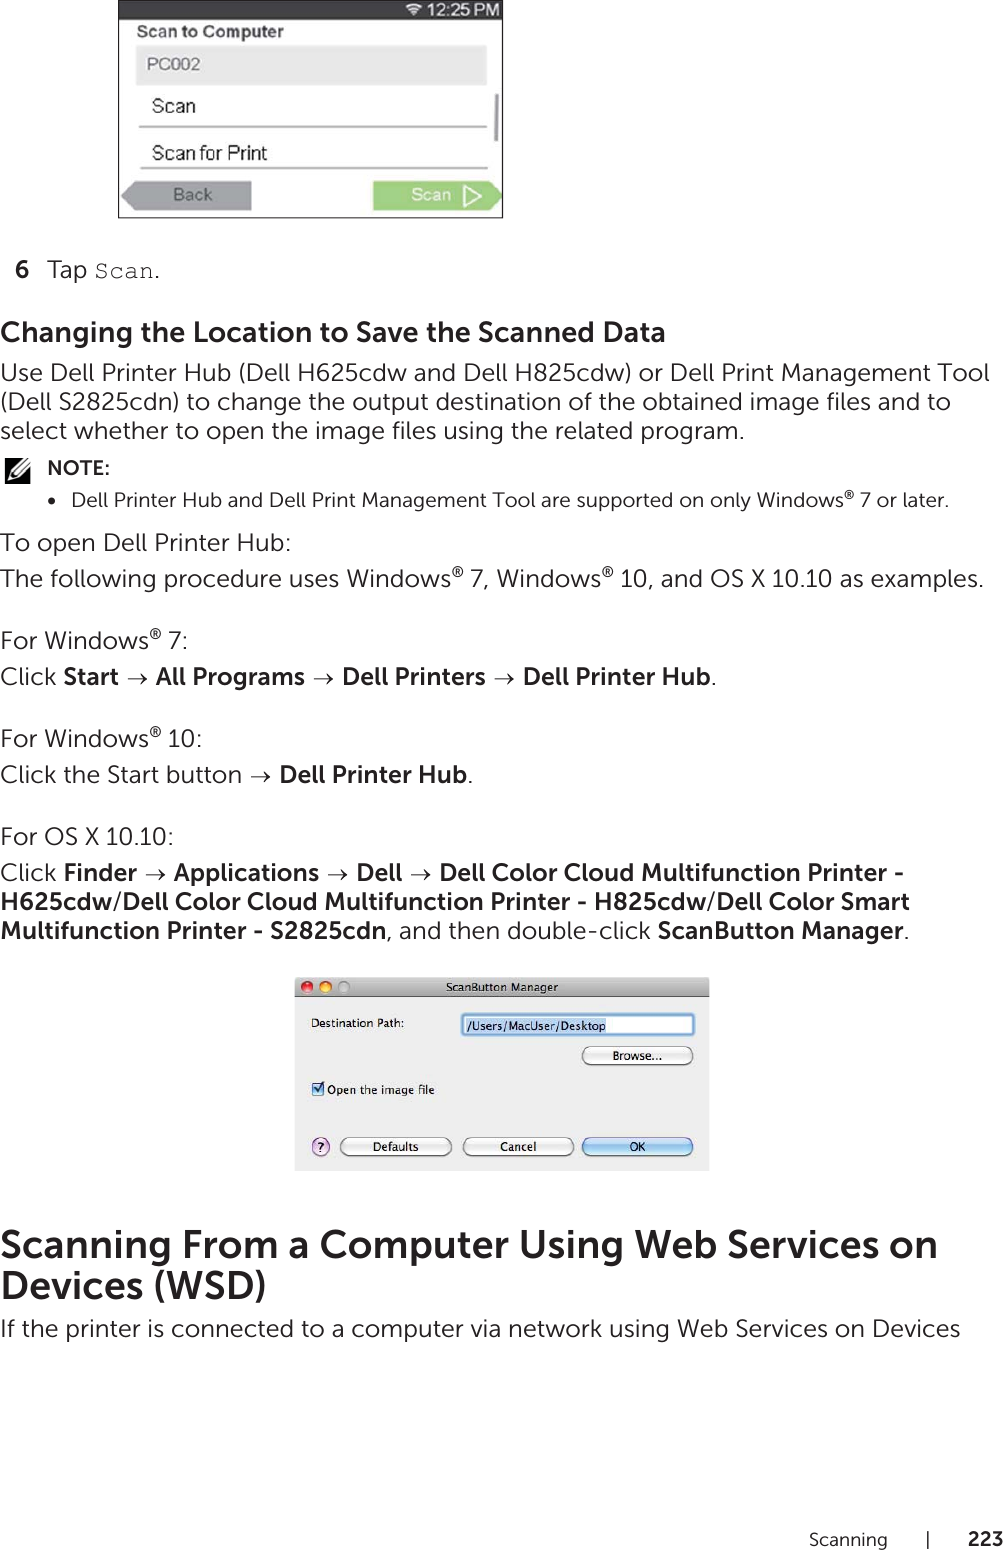 Scanning |2236Tap Scan.Changing the Location to Save the Scanned DataUse Dell Printer Hub (Dell H625cdw and Dell H825cdw) or Dell Print Management Tool (Dell S2825cdn) to change the output destination of the obtained image files and to select whether to open the image files using the related program.NOTE:•Dell Printer Hub and Dell Print Management Tool are supported on only Windows® 7 or later.To open Dell Printer Hub:The following procedure uses Windows® 7, Windows® 10, and OS X 10.10 as examples.For Windows® 7:Click Start  All Programs  Dell Printers  Dell Printer Hub.For Windows® 10:Click the Start button   Dell Printer Hub.For OS X 10.10:Click Finder  Applications  Dell  Dell Color Cloud Multifunction Printer - H625cdw/Dell Color Cloud Multifunction Printer - H825cdw/Dell Color Smart Multifunction Printer - S2825cdn, and then double-click ScanButton Manager.Scanning From a Computer Using Web Services on Devices (WSD)If the printer is connected to a computer via network using Web Services on Devices 